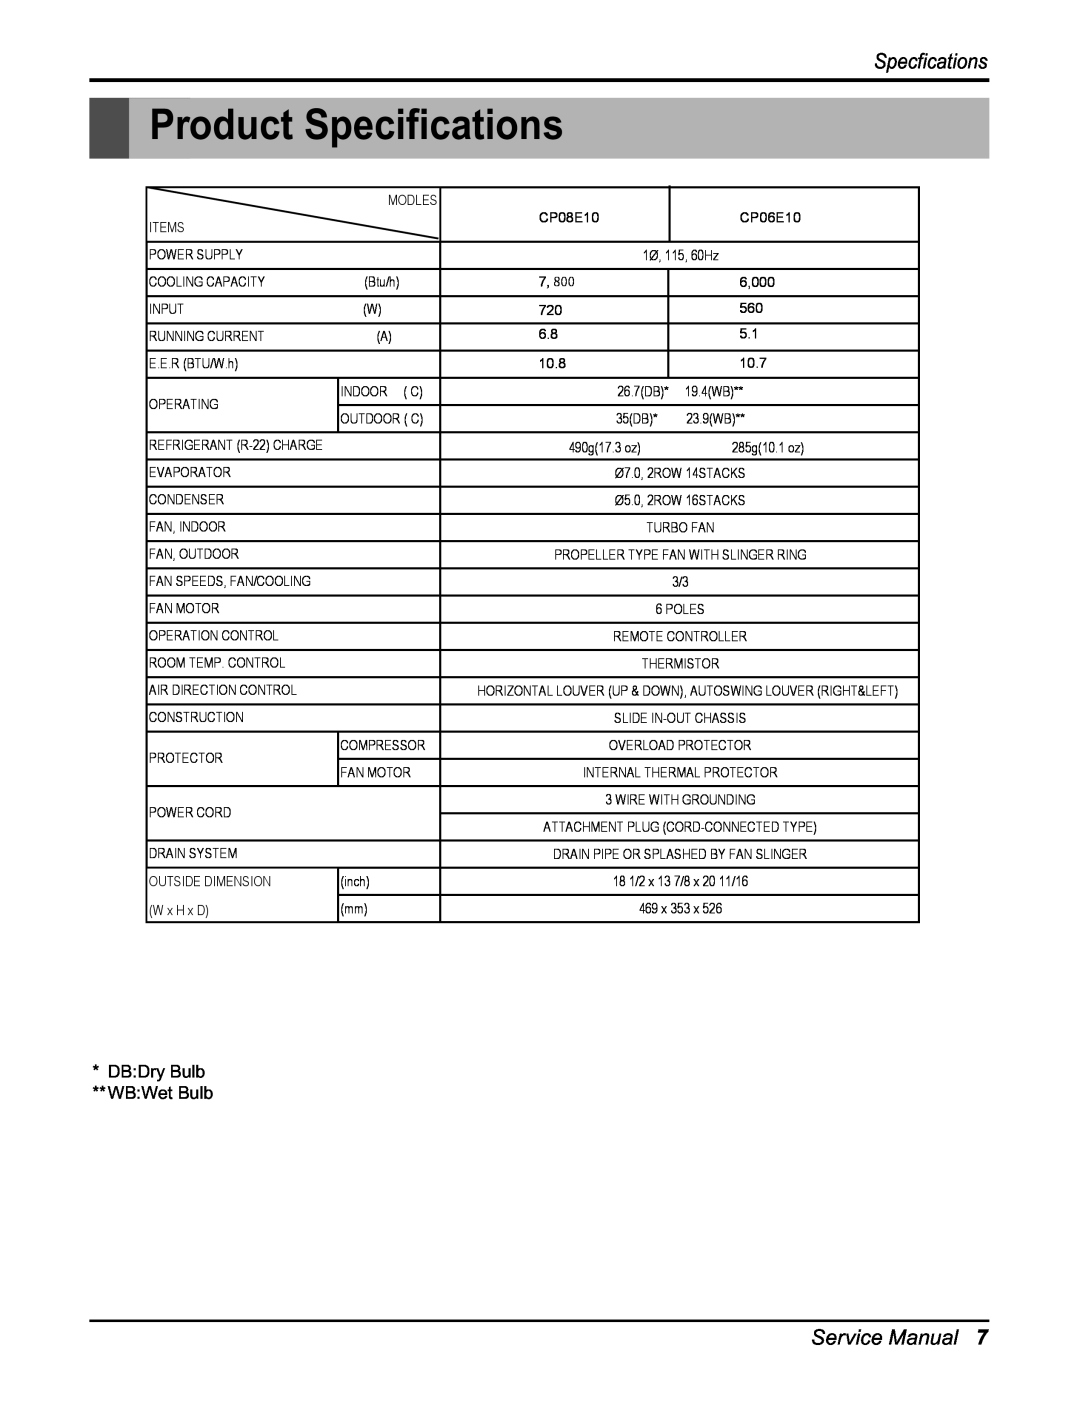 Friedrich CP06E10, CP08E10 manual Product Specifications, Specfications 